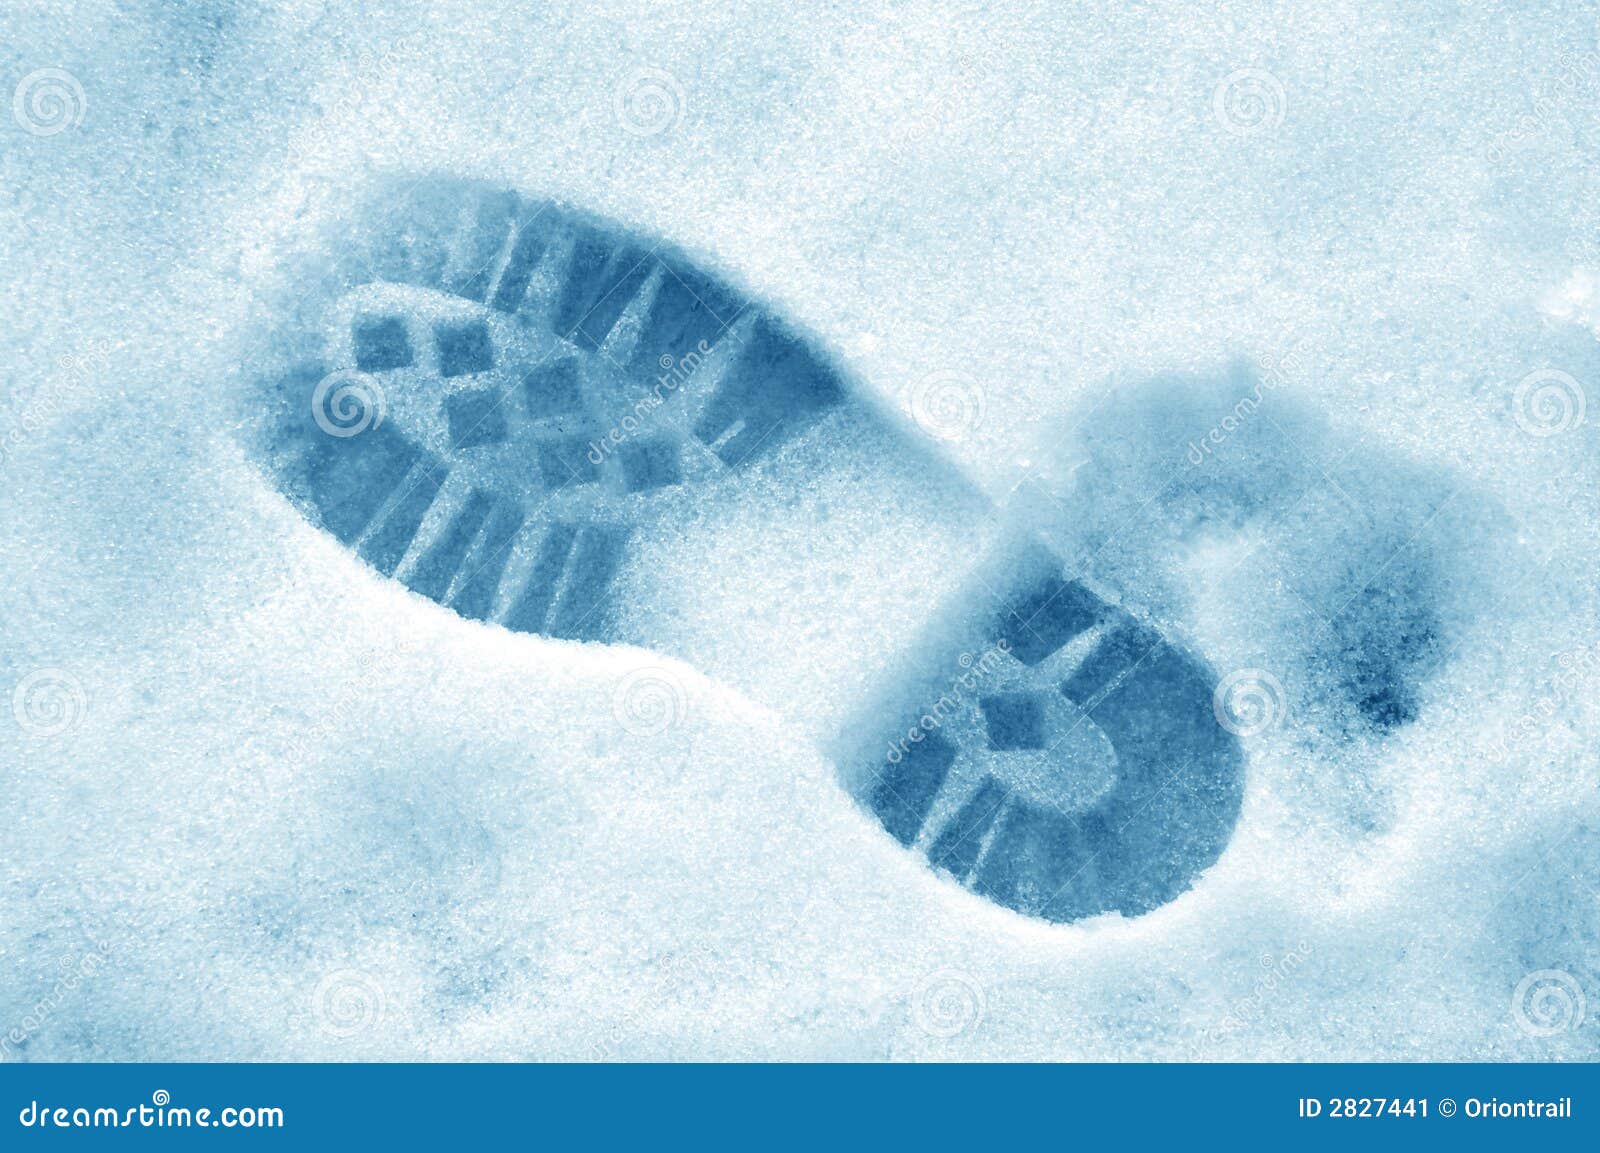 Footprint In The Snow Stock Image 